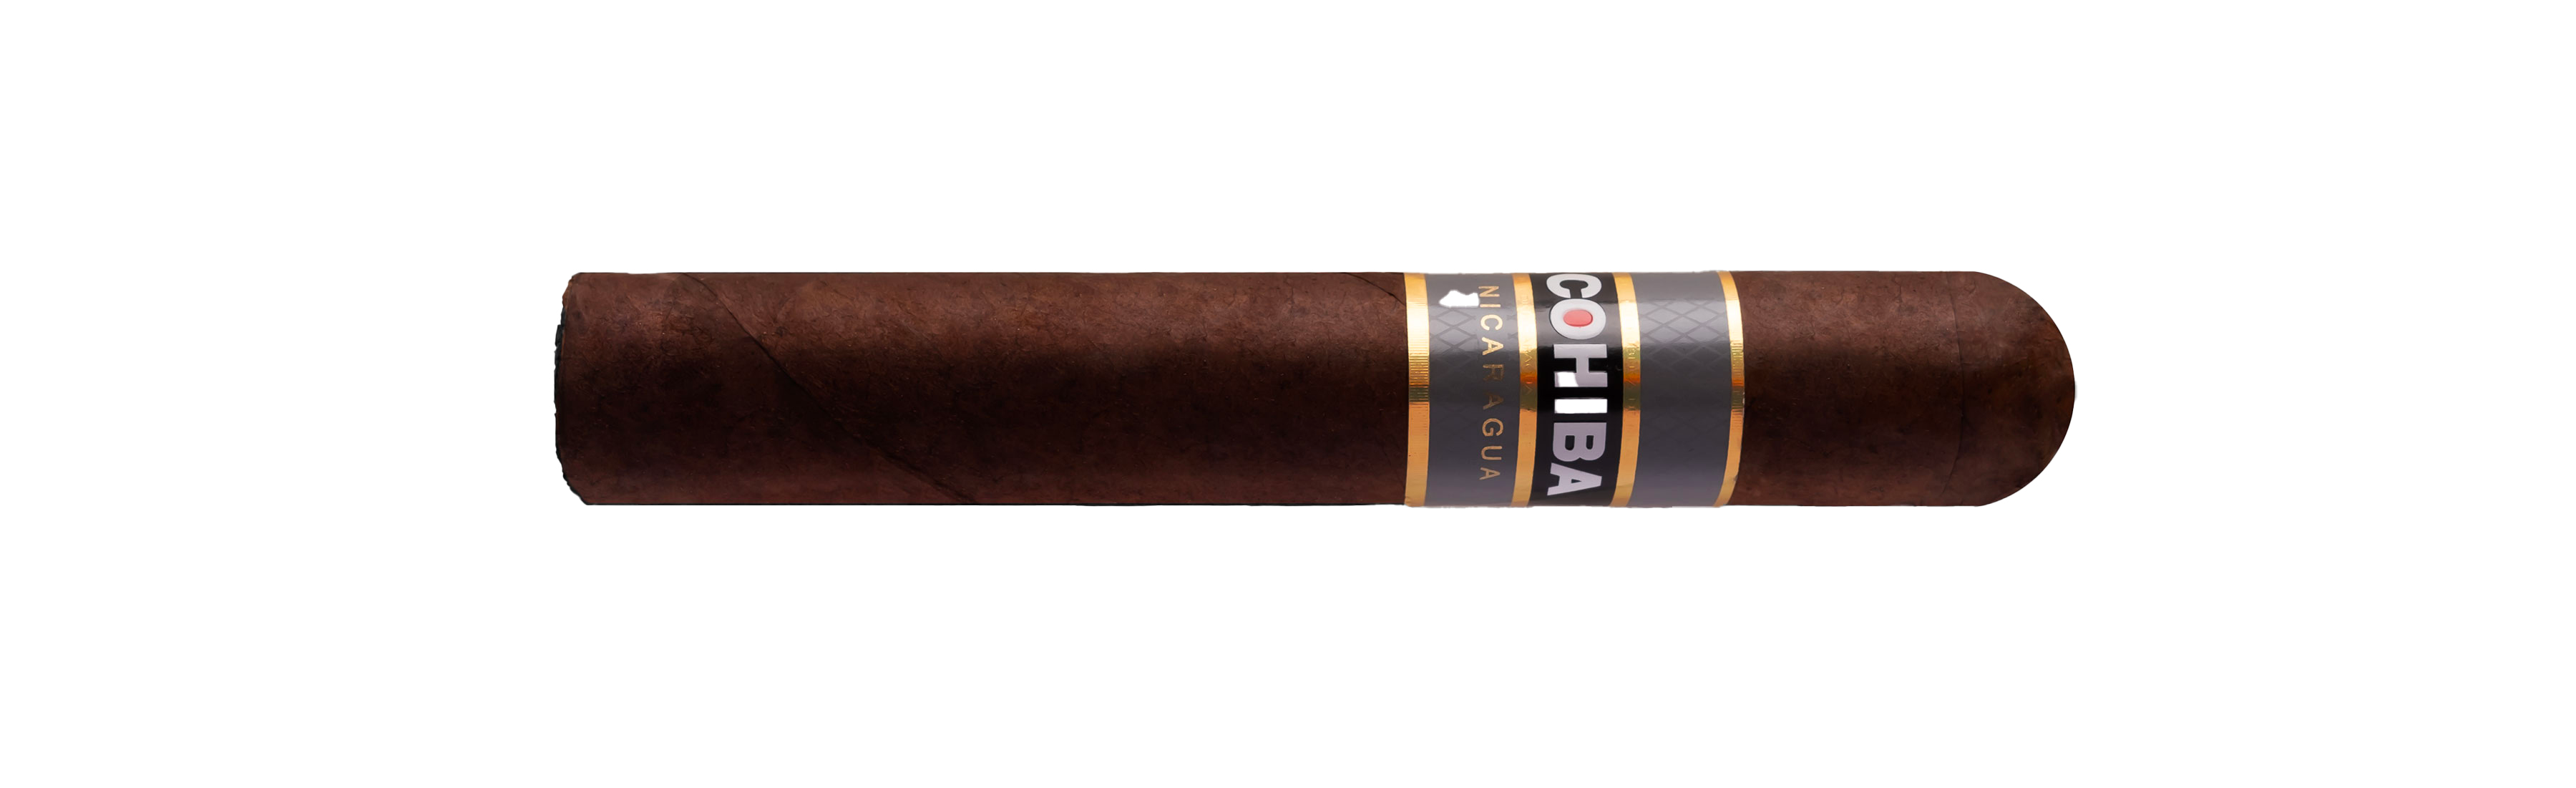 A Cohiba cigar being unwrapped